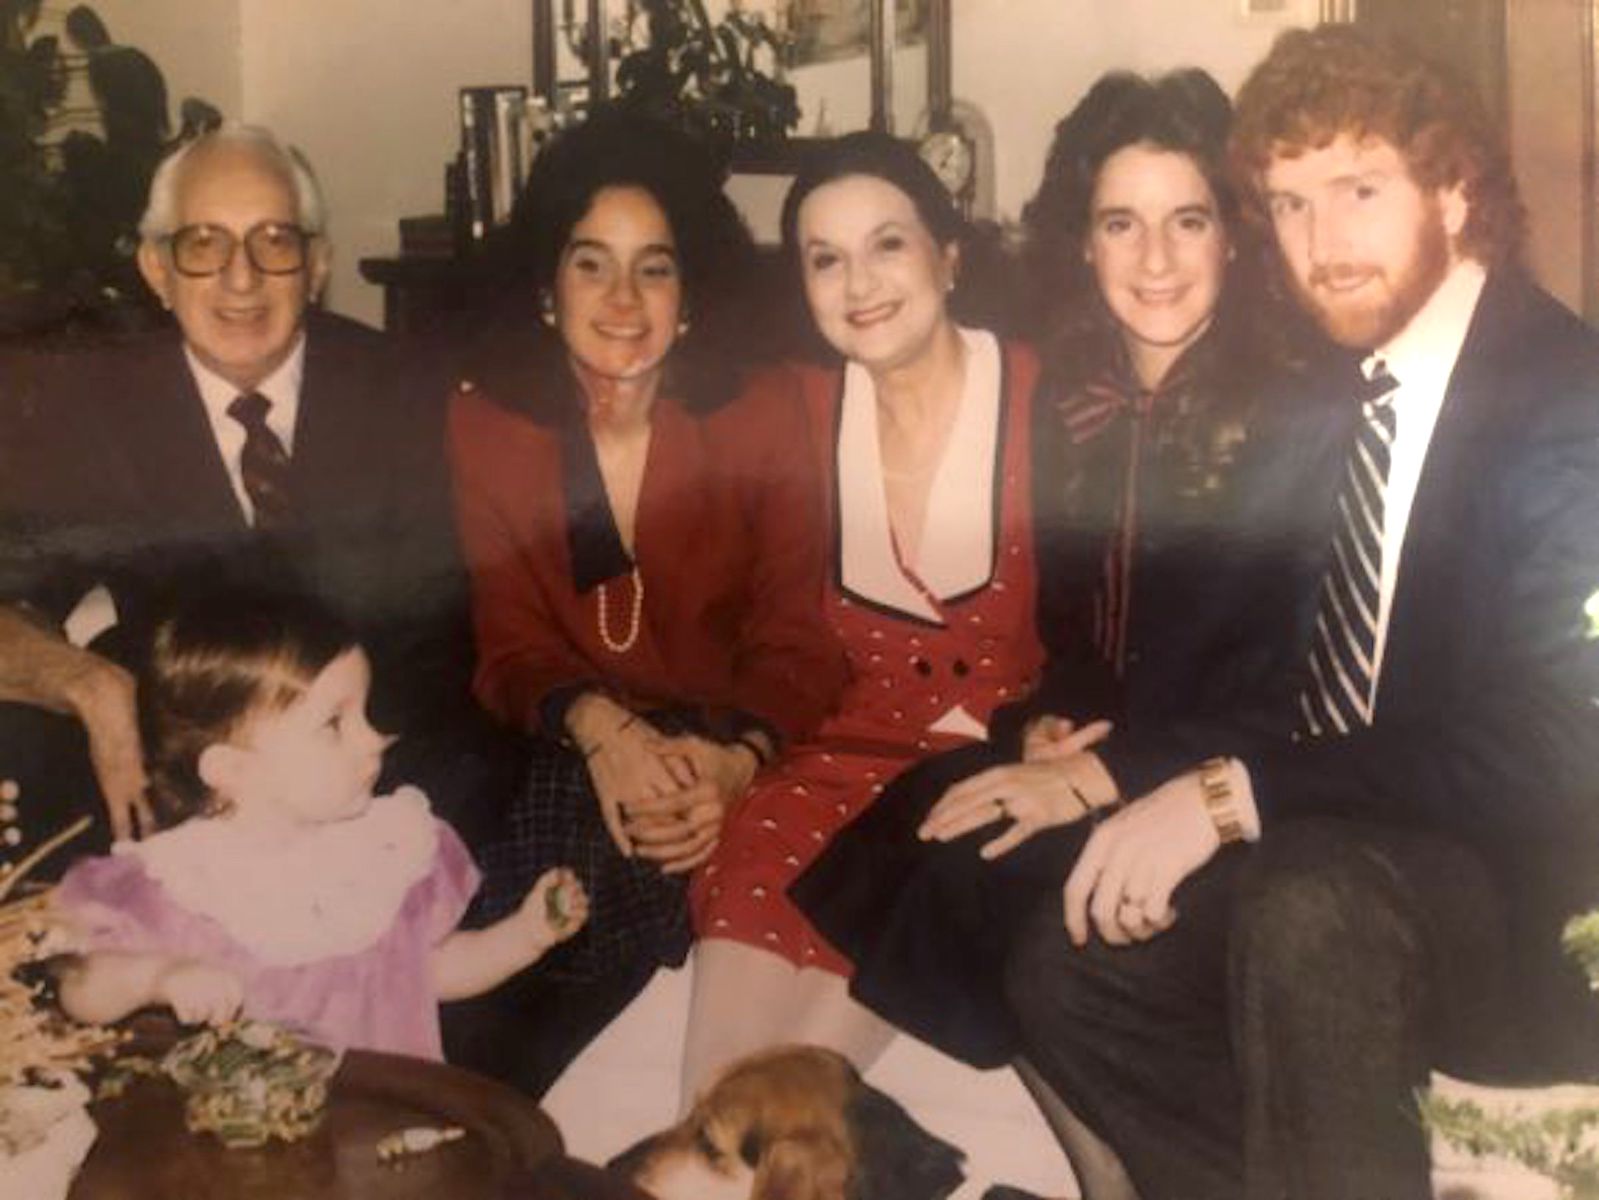 A portrait of the Laham family at Christmas. Cheryl shares, “I just noticed the pearls again! My sister's husband, their dog, and first child were all included here, but my partner was not allowed to come to Kansas.” Photo courtesy of Cheryl Qamar.